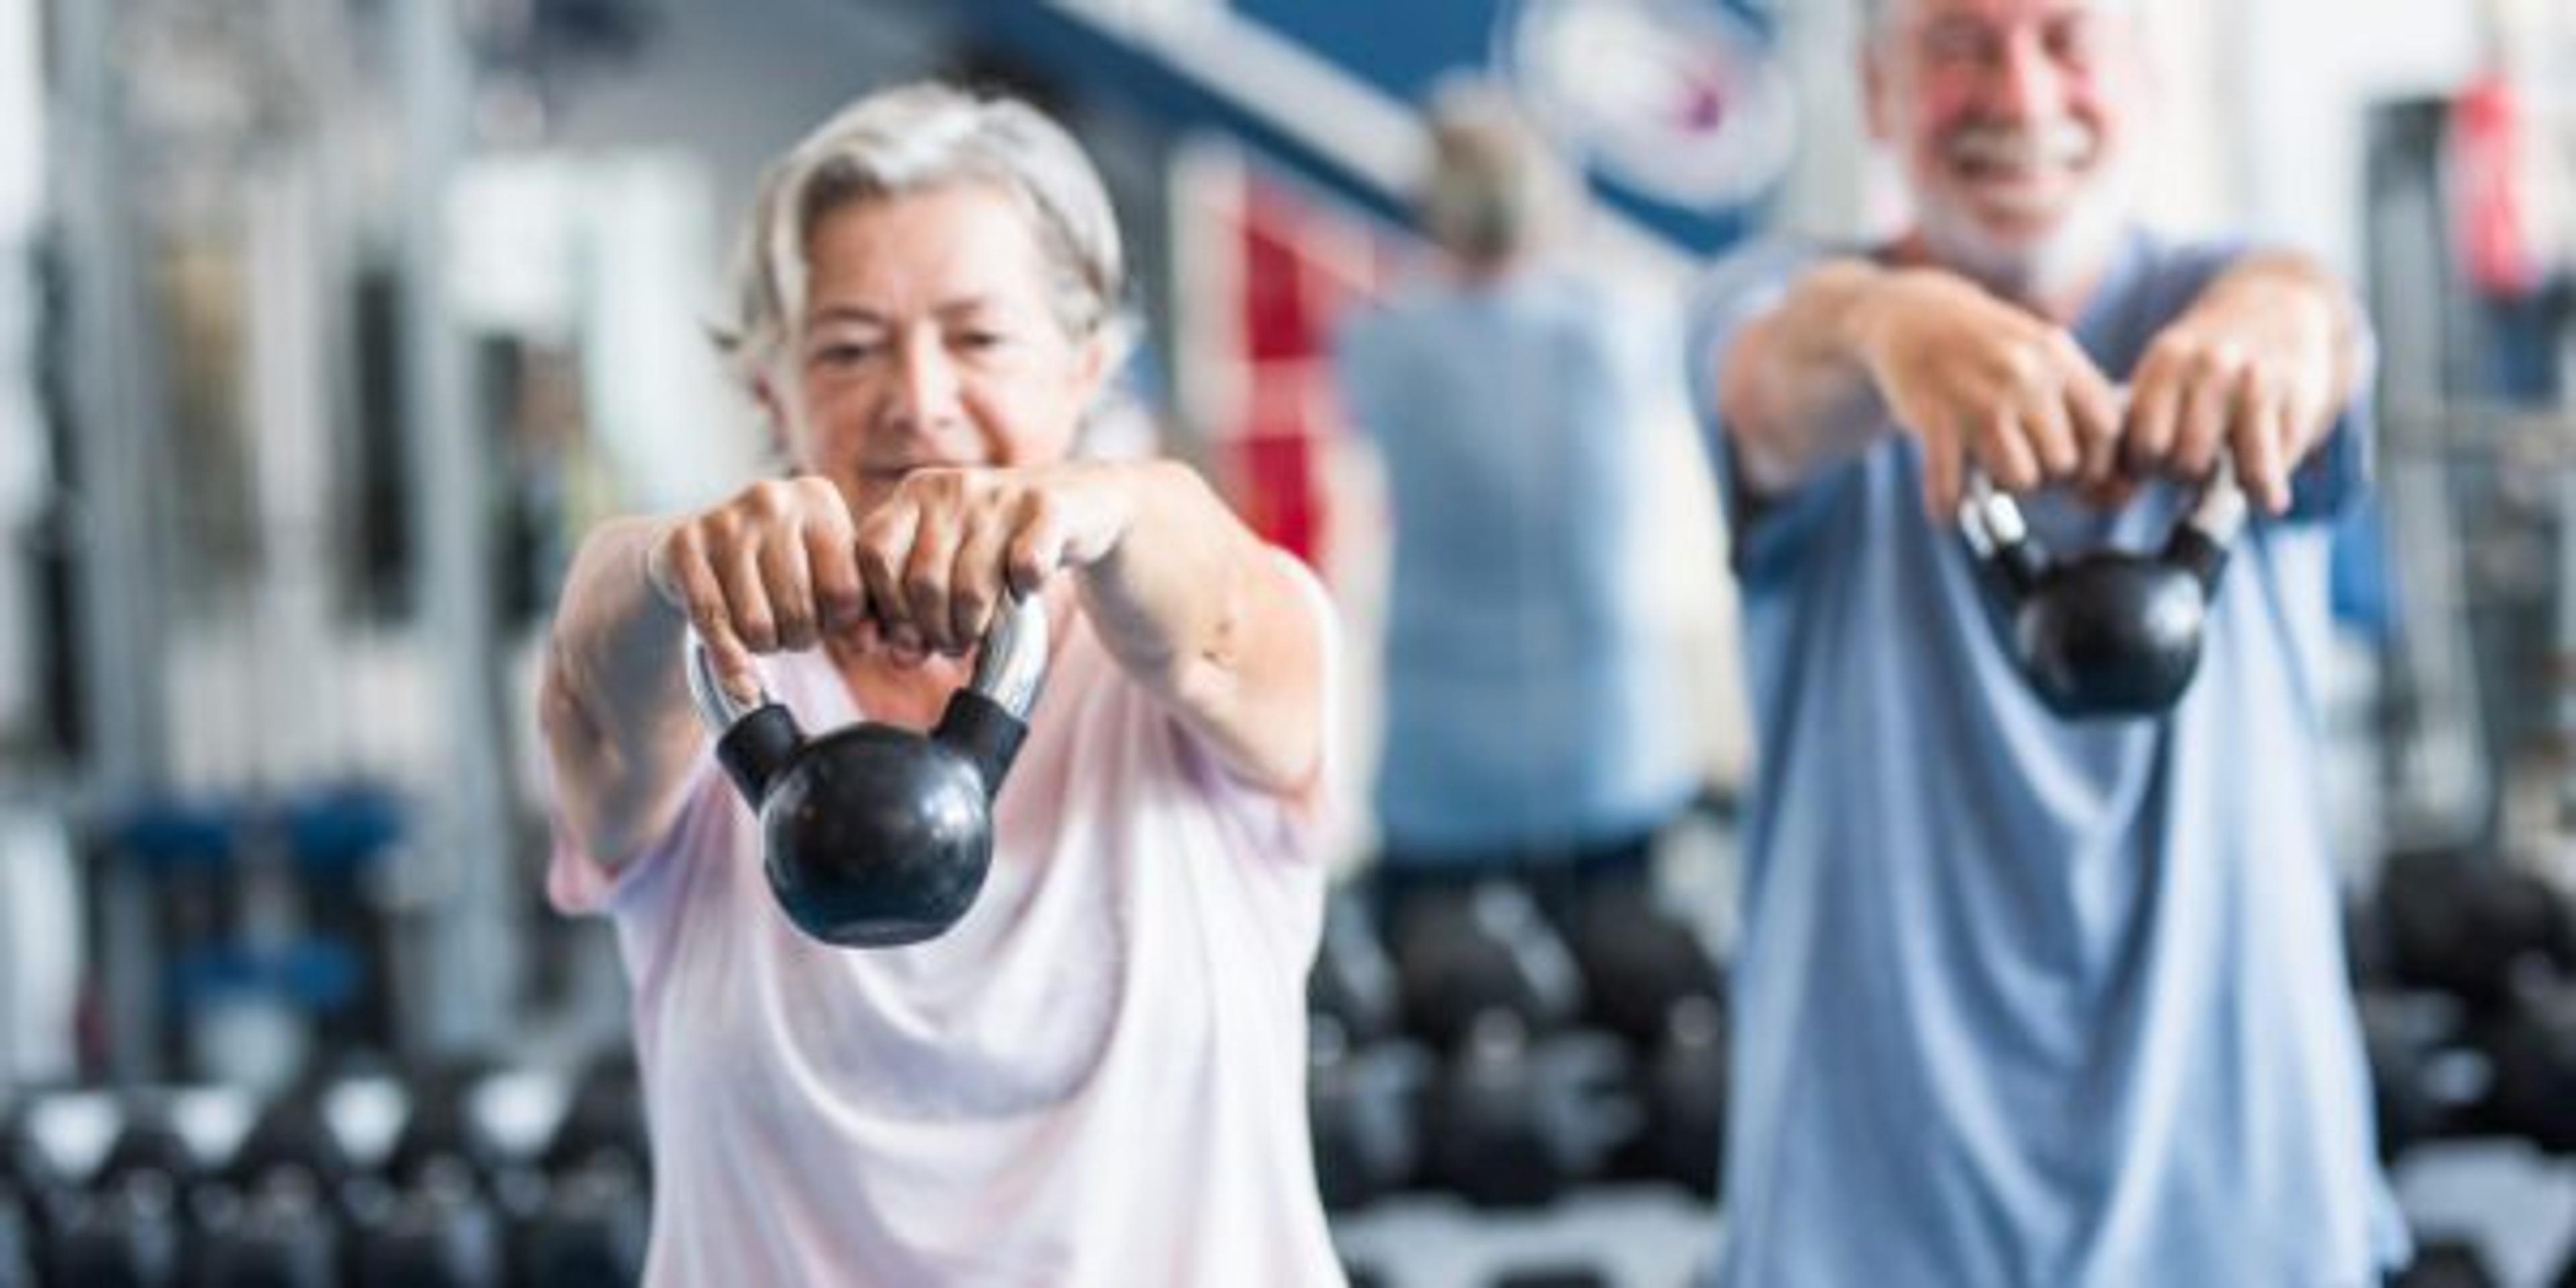 Indoor Fitness Ideas for Seniors and Families